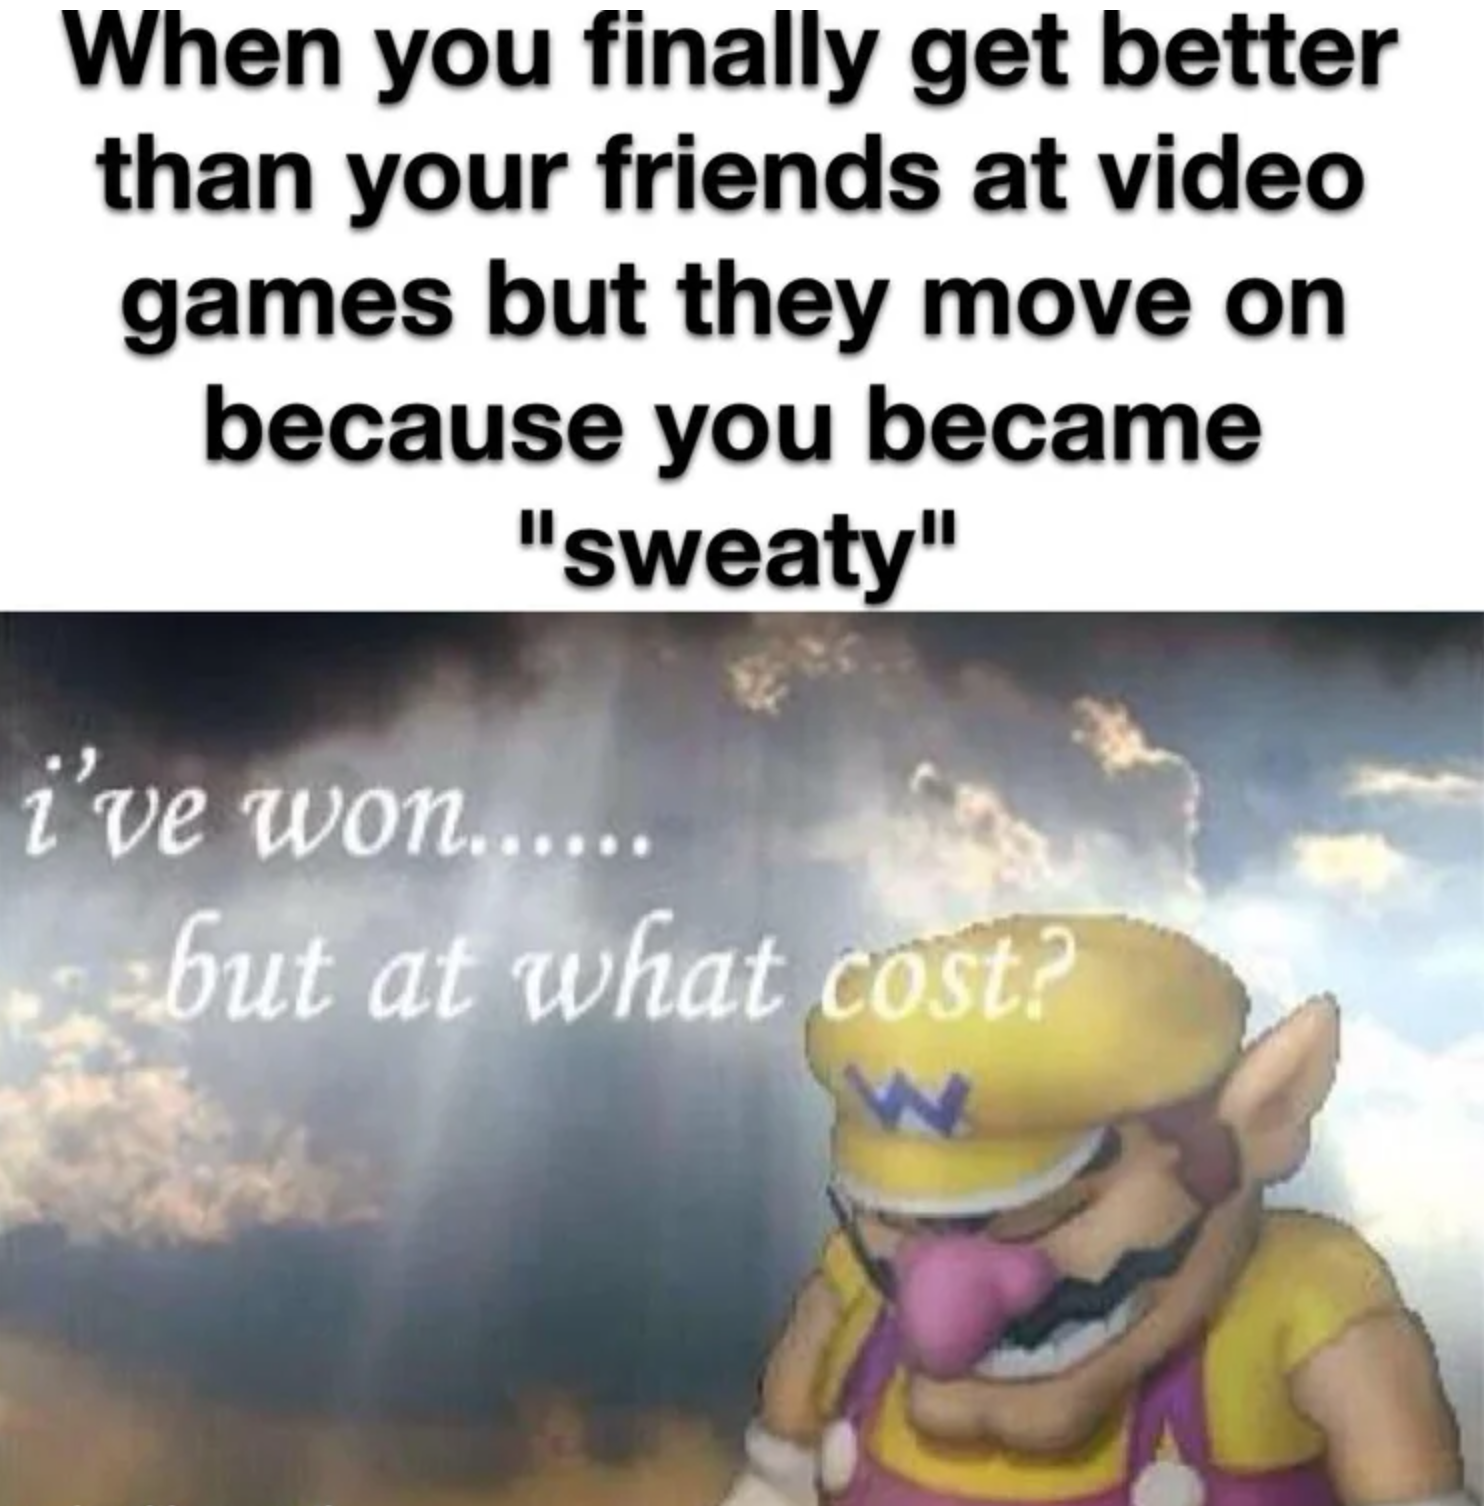 funny gaming memes - ve won but at what cost meme - When you finally get better than your friends at video games but they move on because you became "sweaty" i've won...... but at what cost